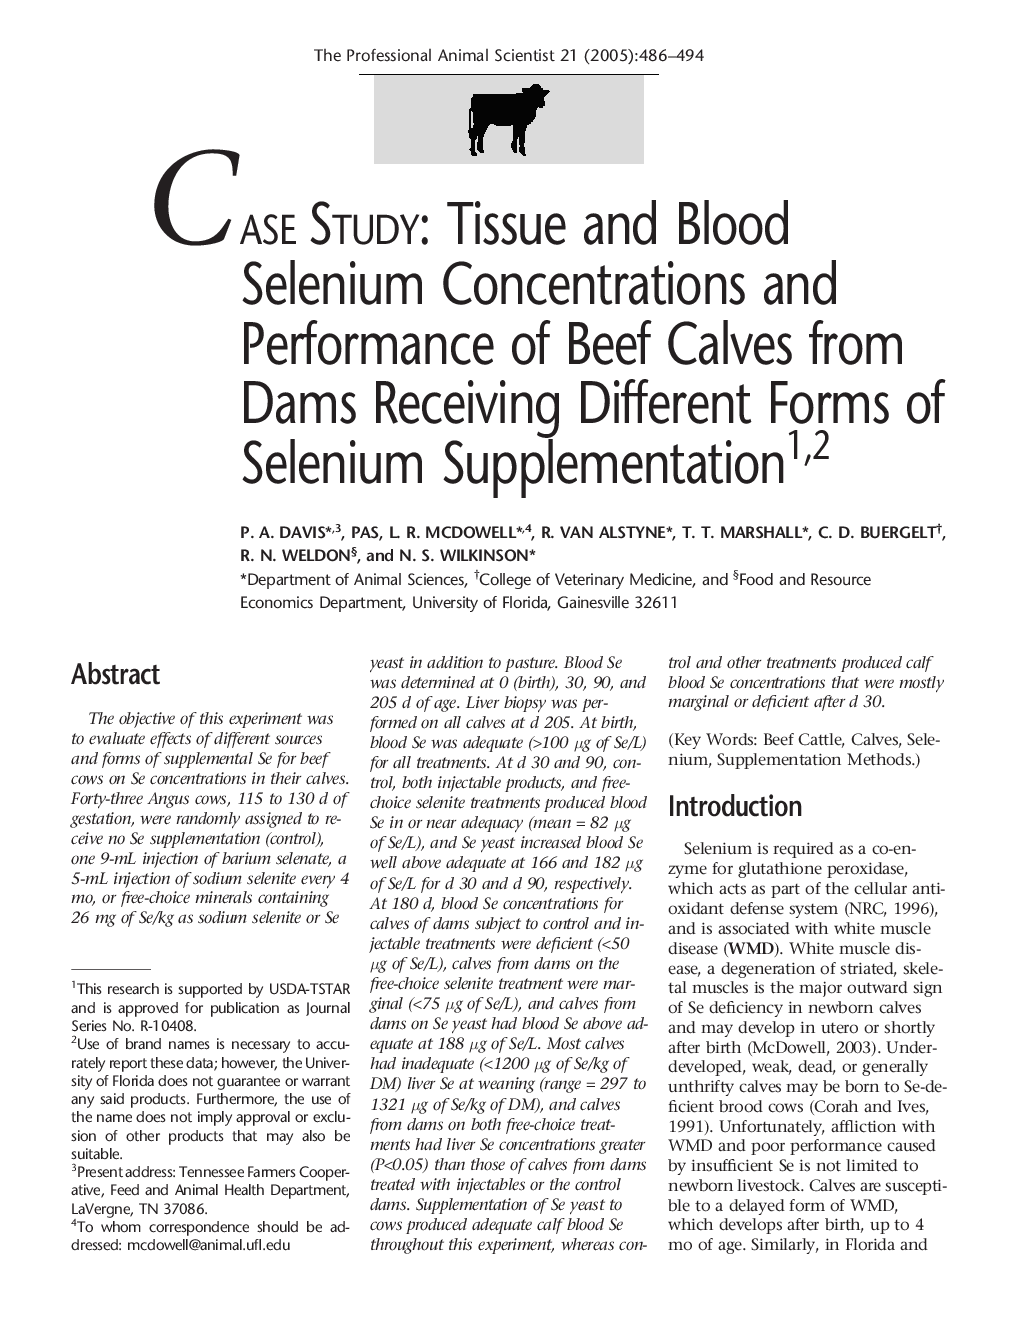 CASE STUDY: Tissue and Blood Selenium Concentrations and Performance of Beef Calves from Dams Receiving Different Forms of Selenium Supplementation12